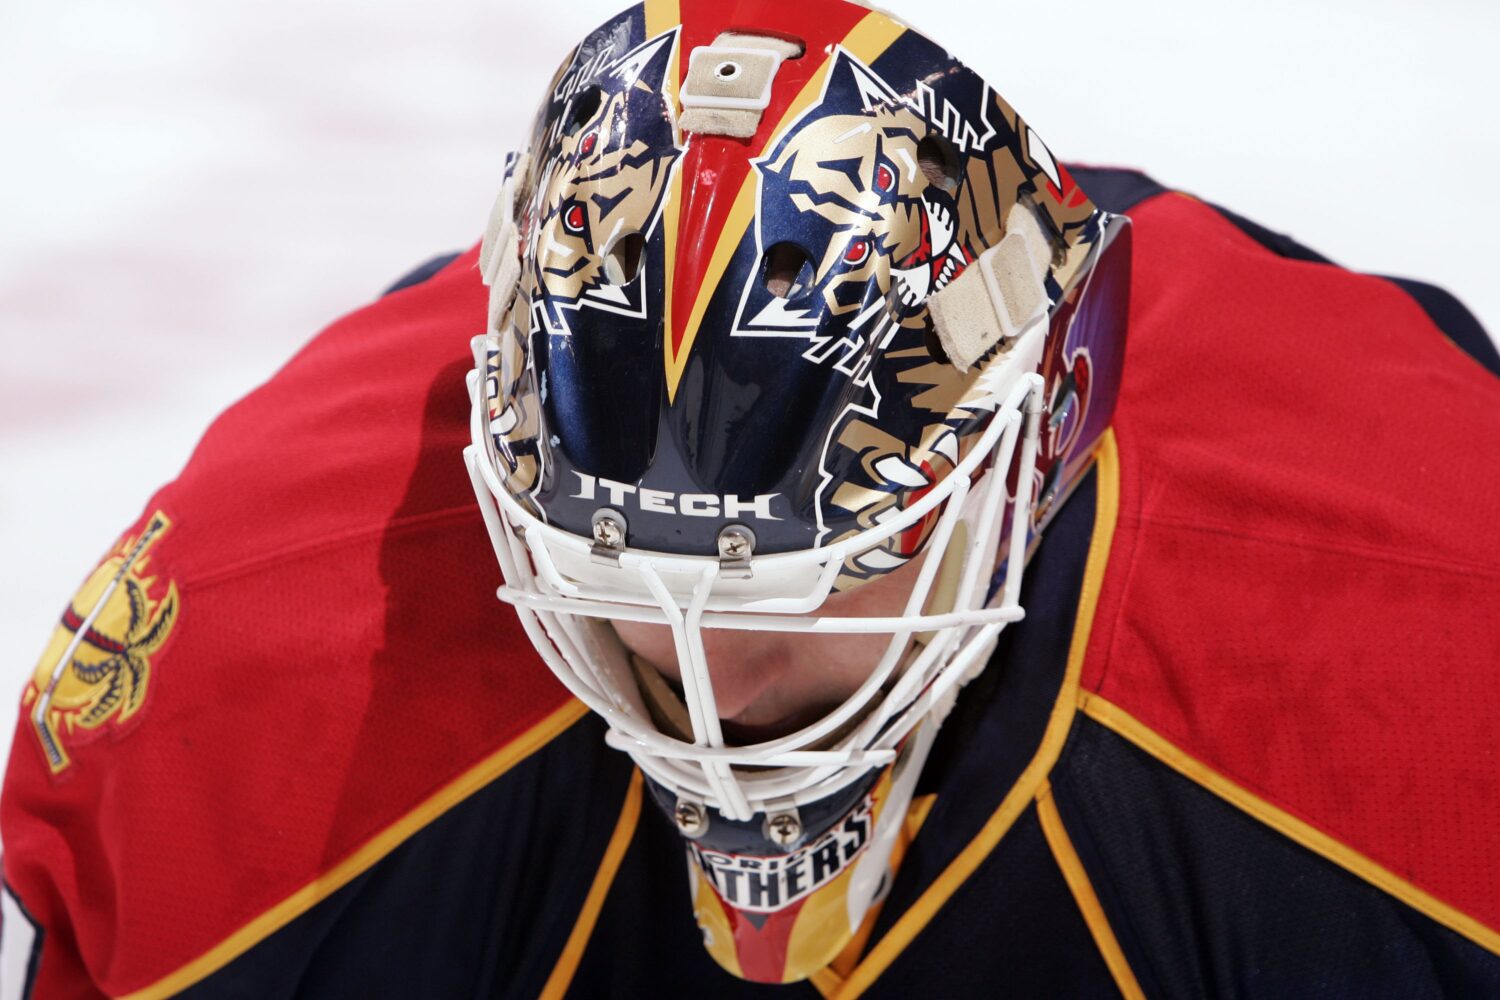 helmet Archives - Page 5 of 6 - Florida Panthers Virtual Vault